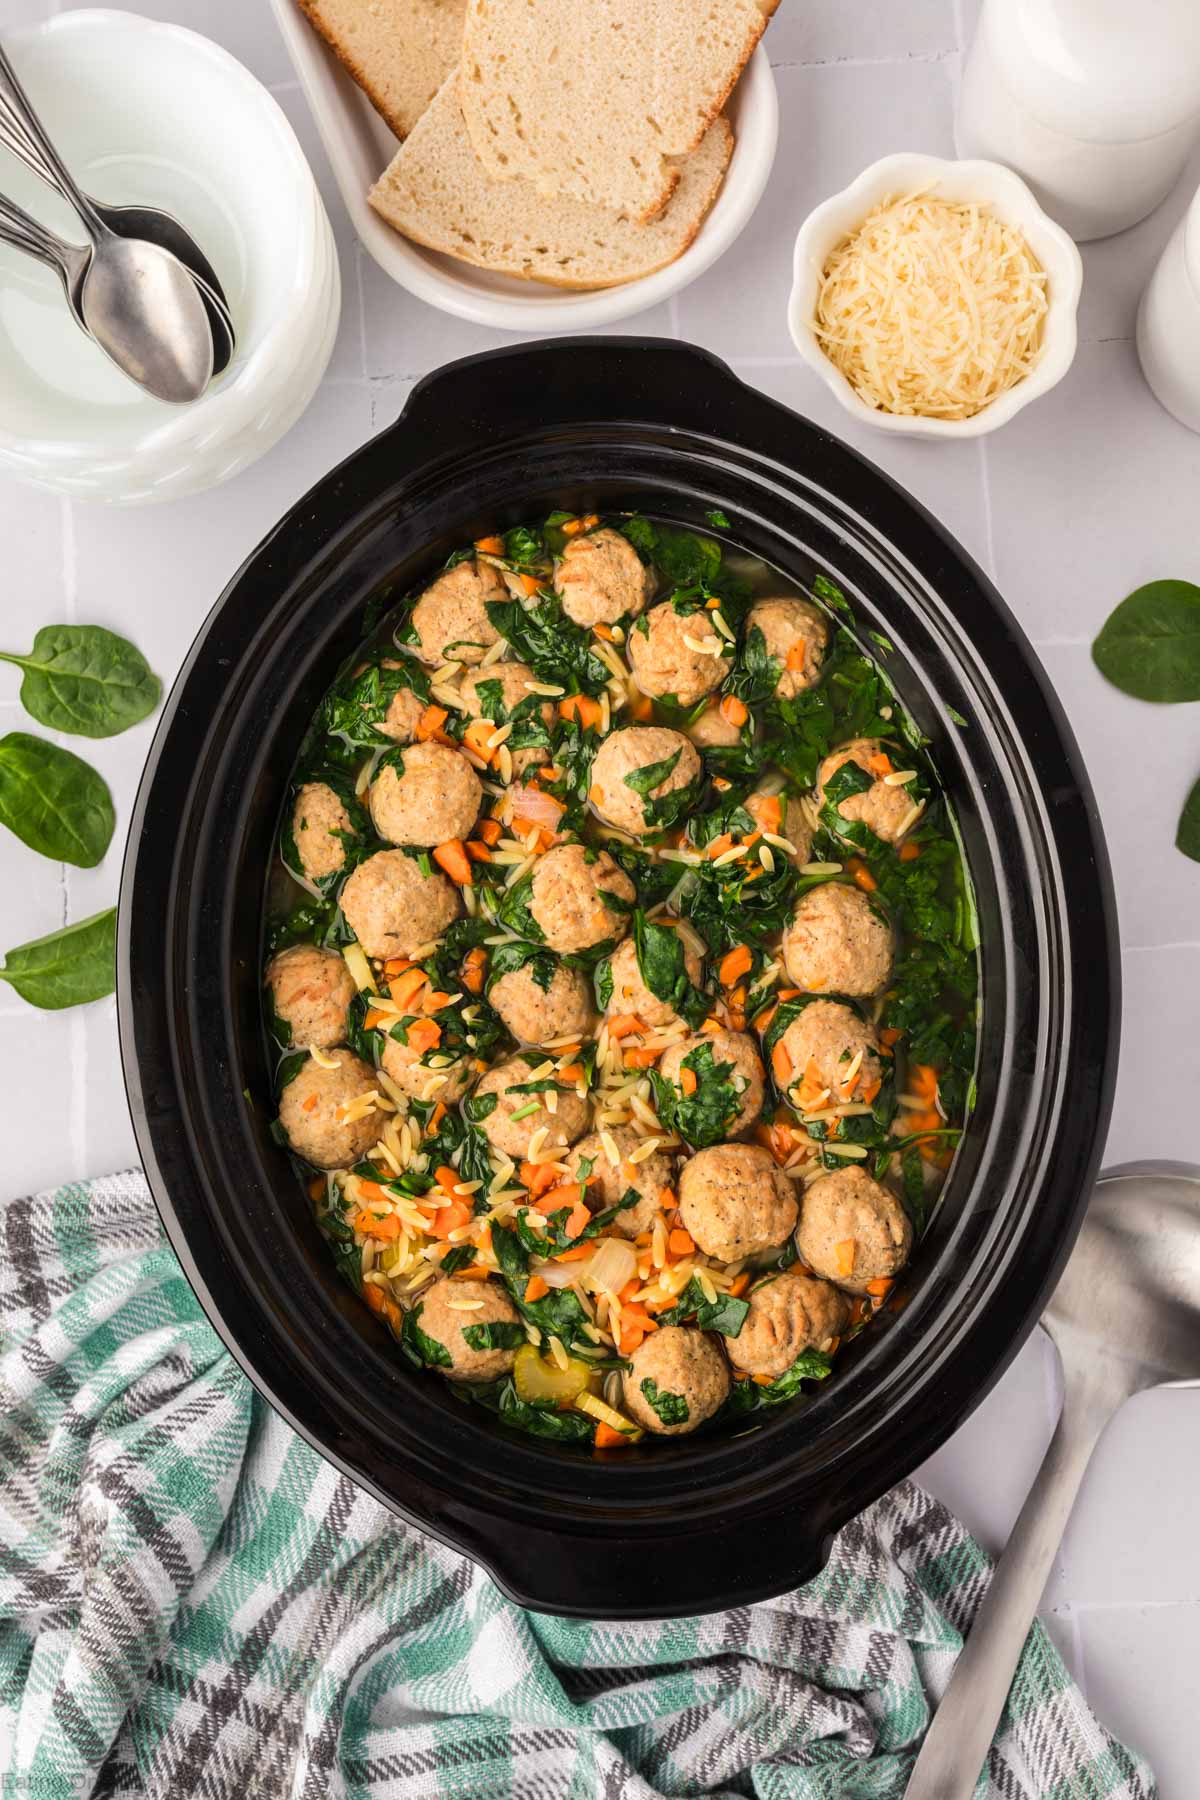 Italian Wedding Soup in the slow cooker